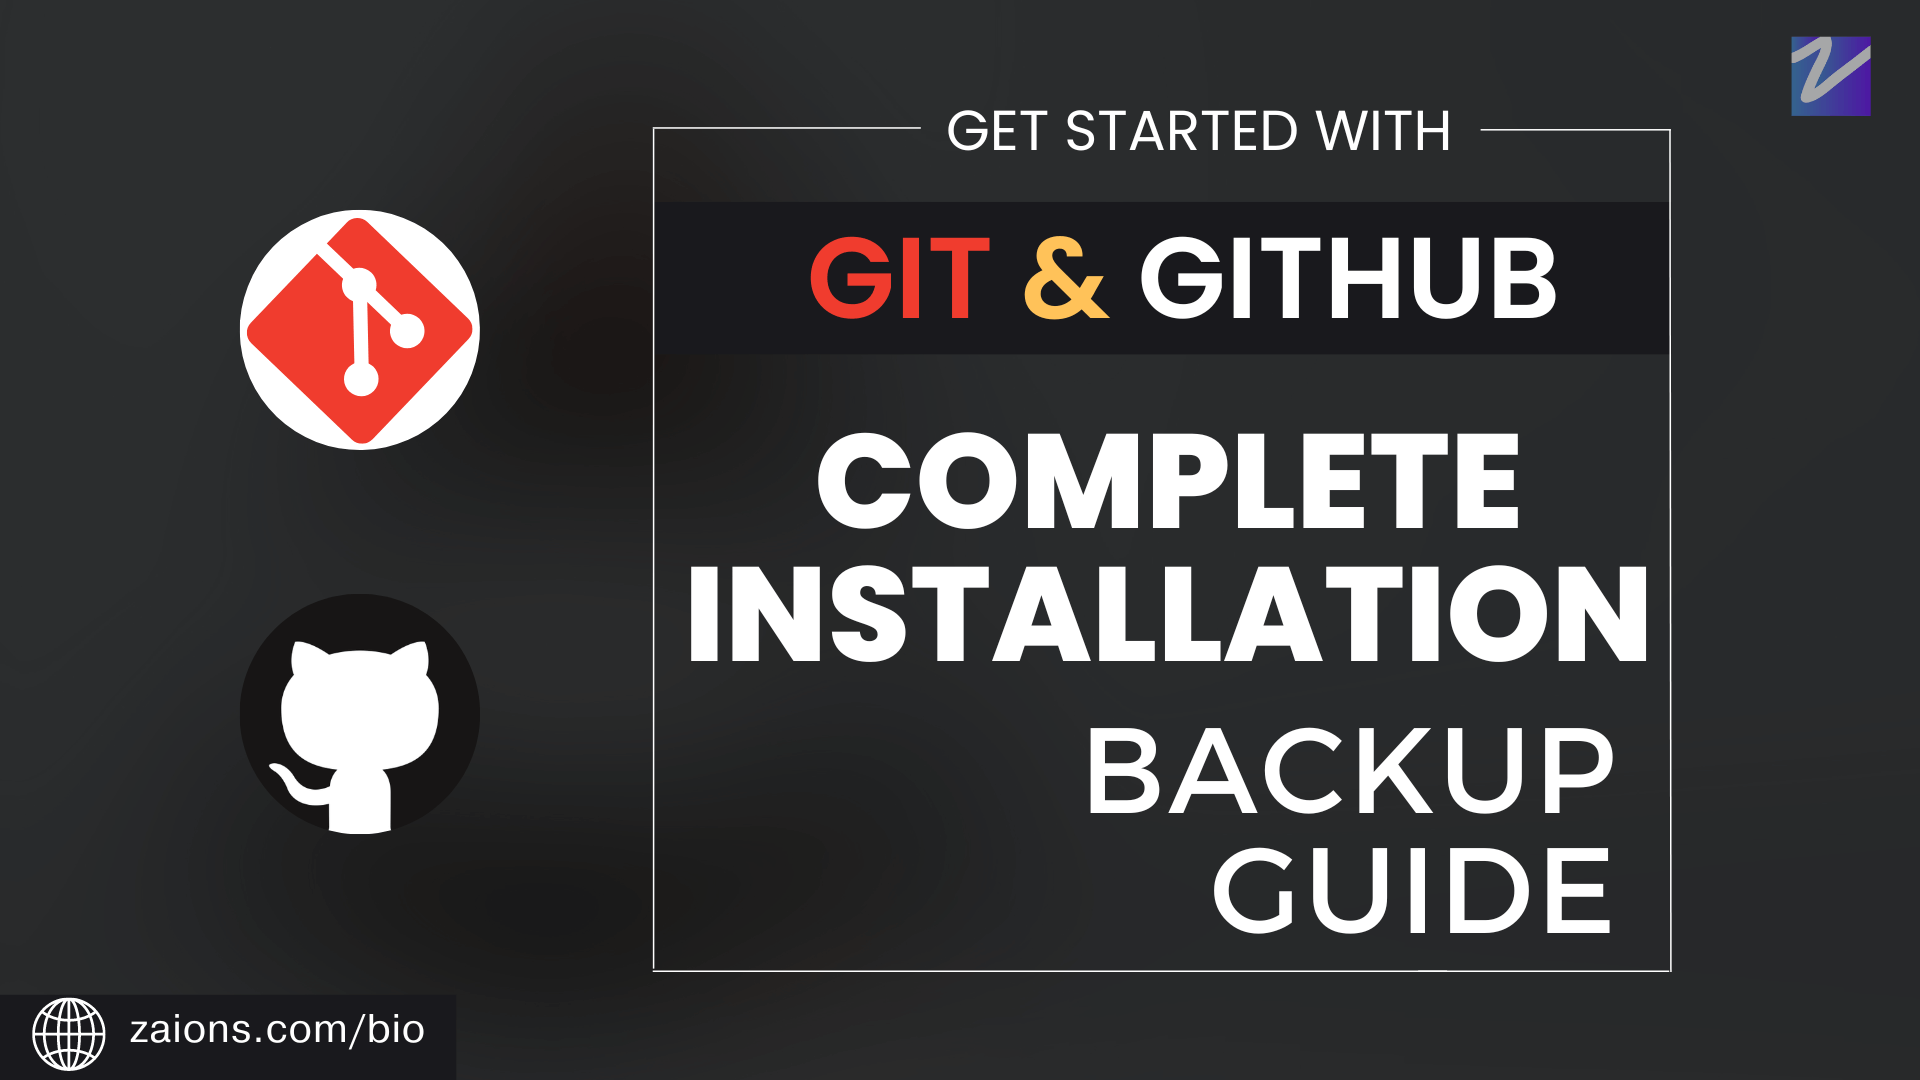 get-started-with-git-&-github-complete-install-&-backup-guide-zaions-aoneahsan